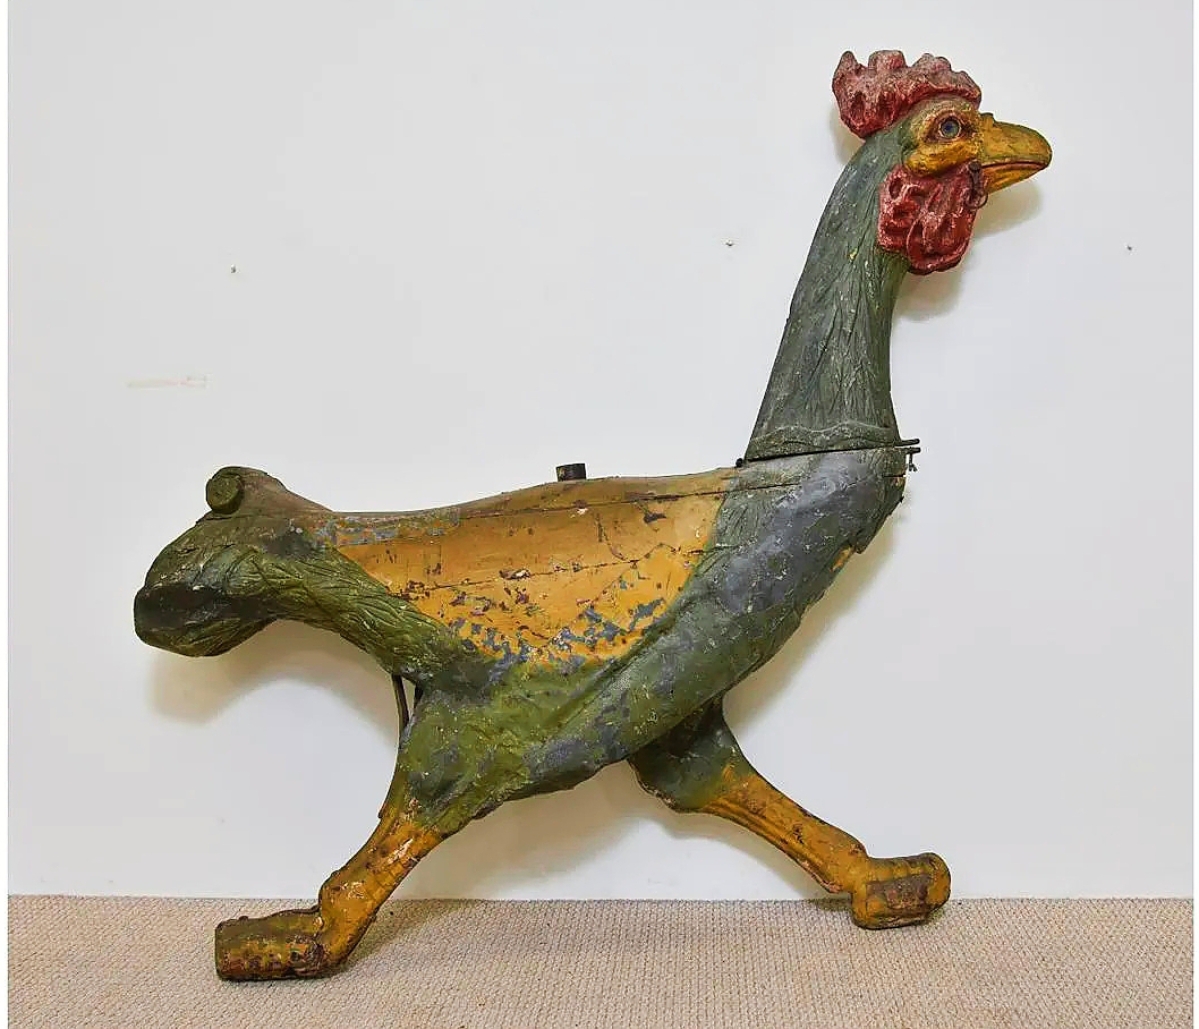 “I’d been eyeing that up for 25 years,” auctioneer Ted Wiederseim said of this carved and painted carousel rooster. It had been in the Stoudt restaurant as a decoration and sold for $2,750 to the trade.